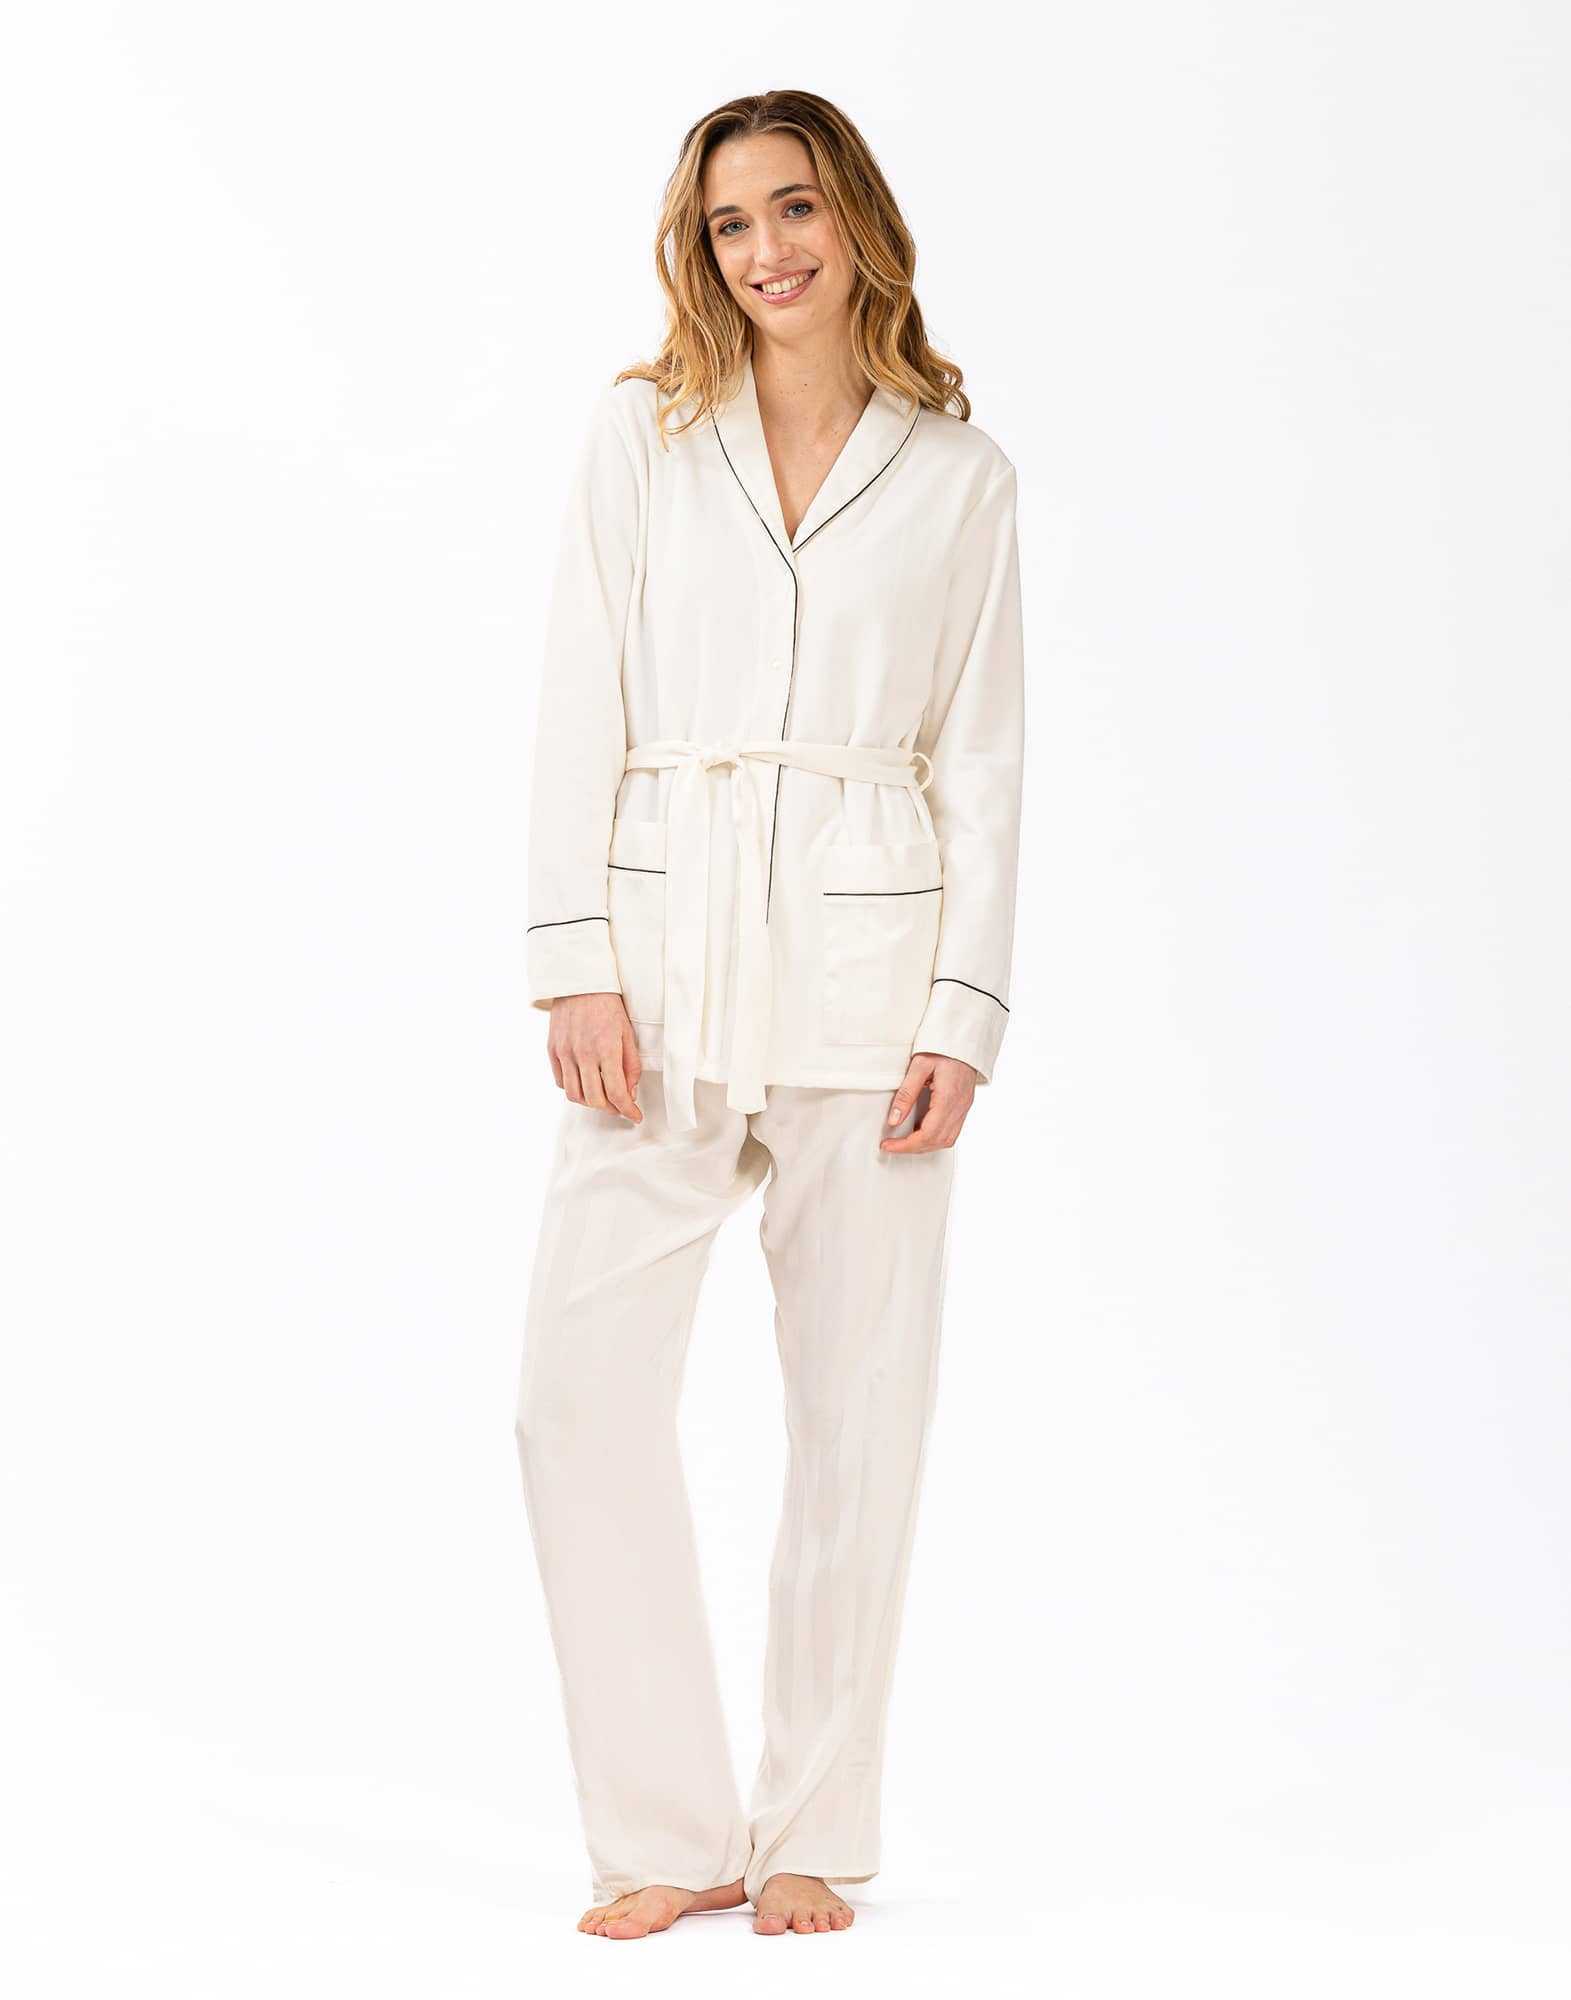 Buttoned pyjamas GABRIELLE 616 made from ecru microfleece and viscose jacquard | Lingerie le Chat